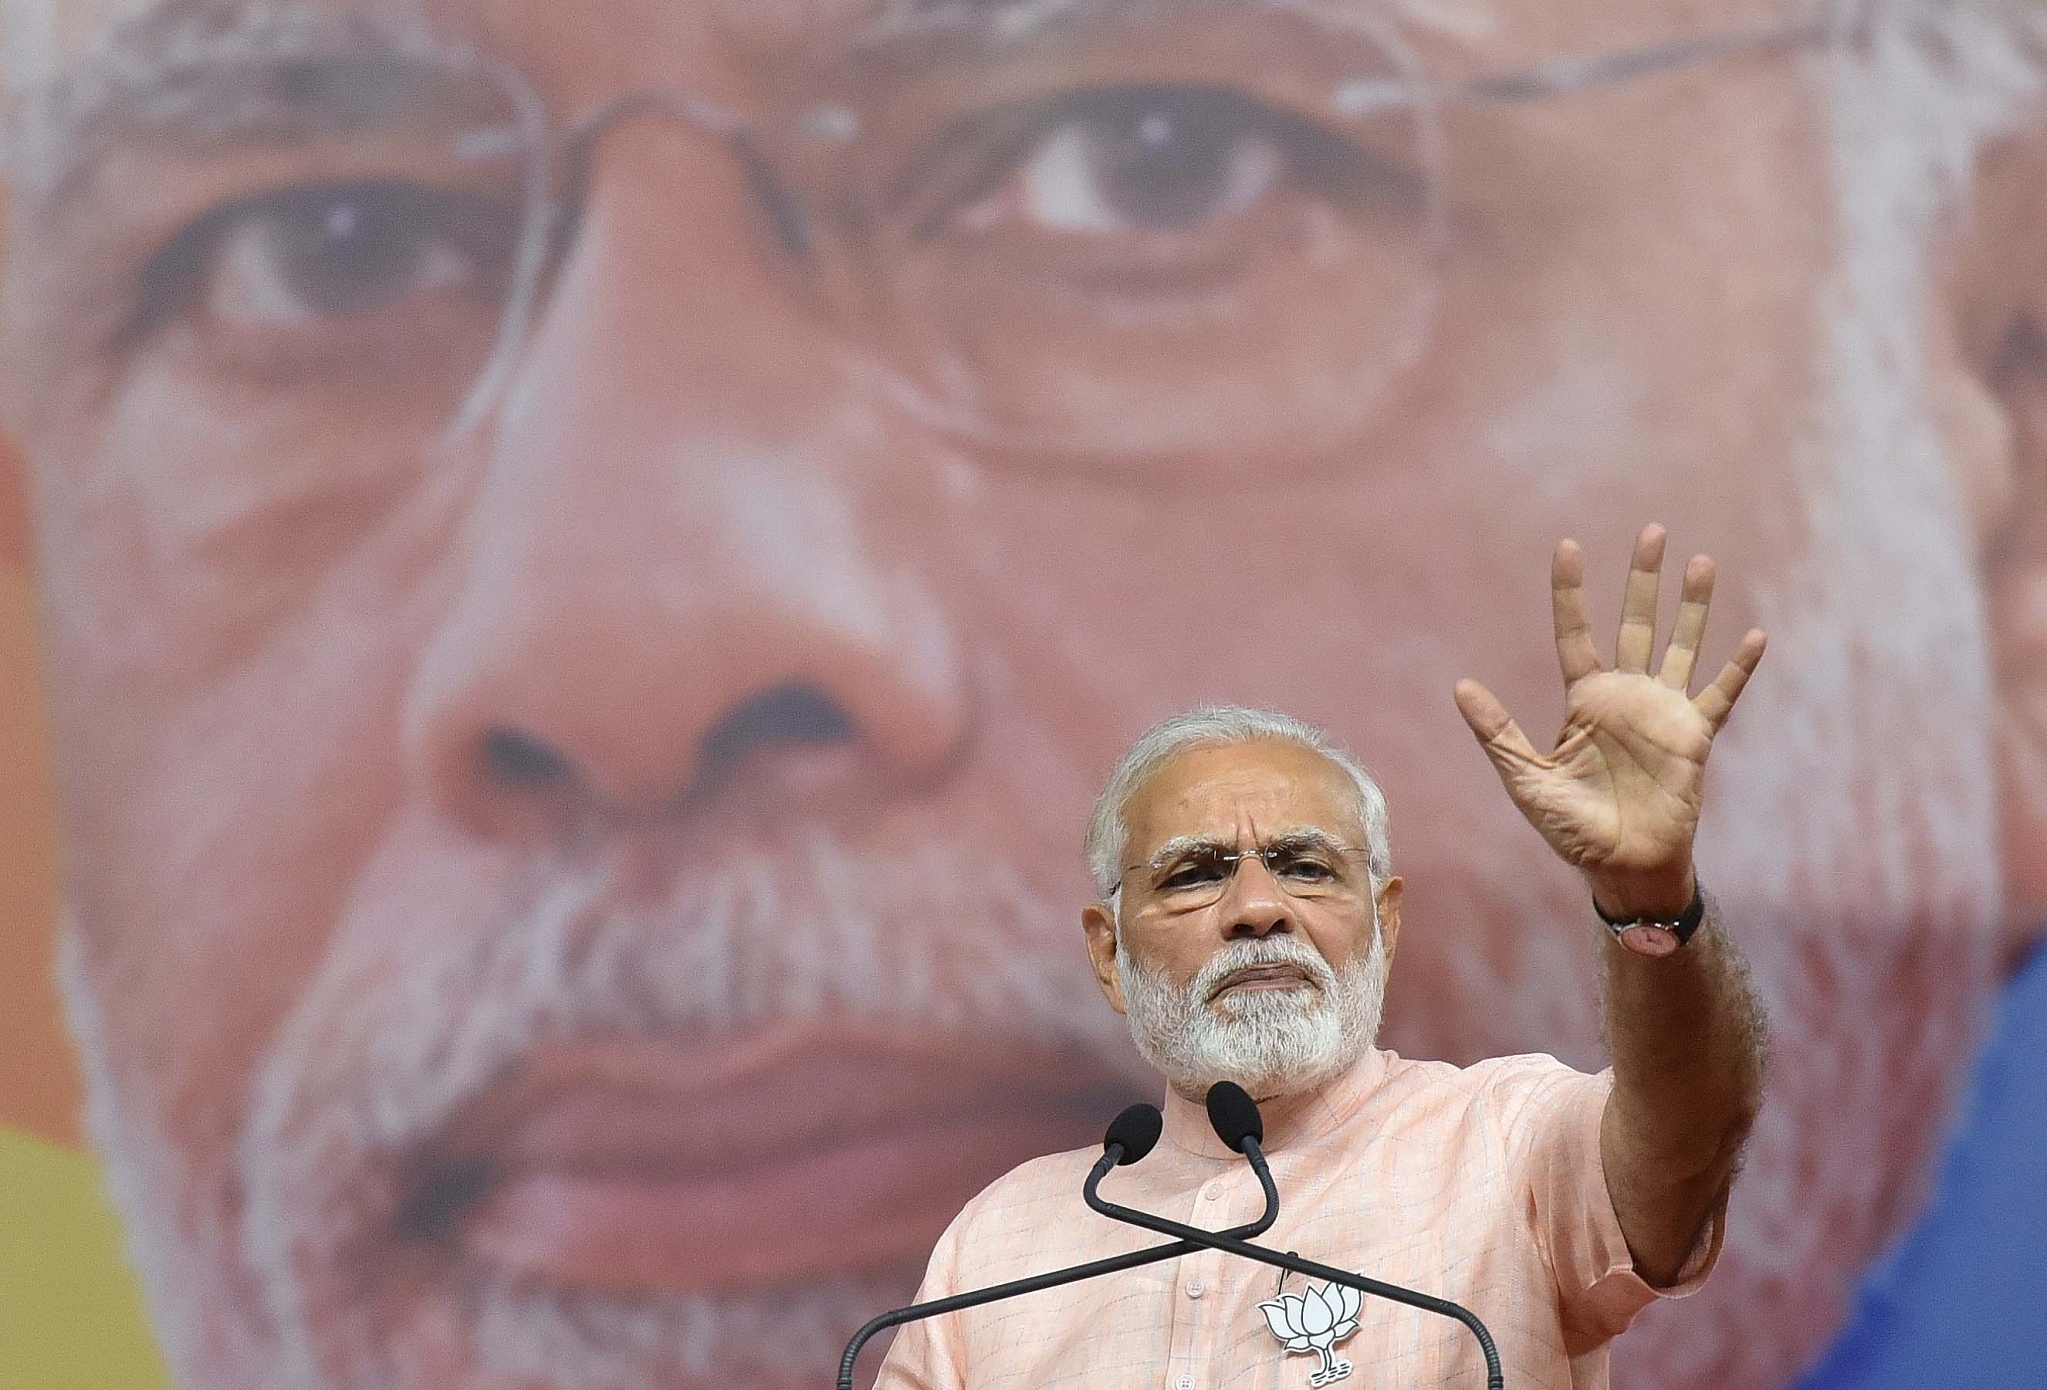 Prime Minister of India Narendra Modi during BJP rally ahead of Karnataka state Assembly election at National College Ground on 8 May 2018 in Bengaluru, India. (Arijit Sen/Hindustan Times via Getty Images)